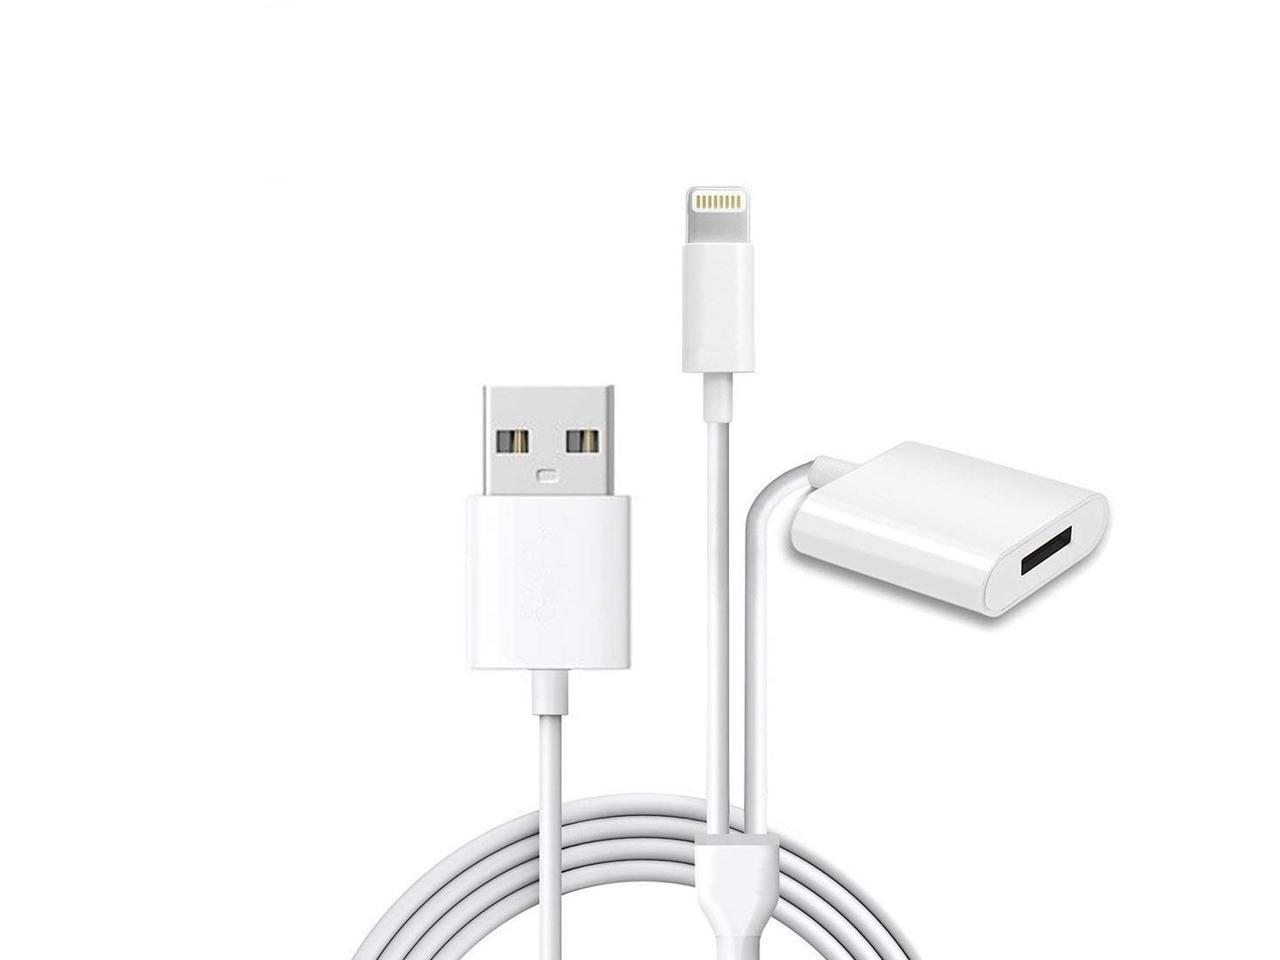 Female USB Charging Adapter Charger Cable Cord For Apple iPad Pro Pencil iPencil 